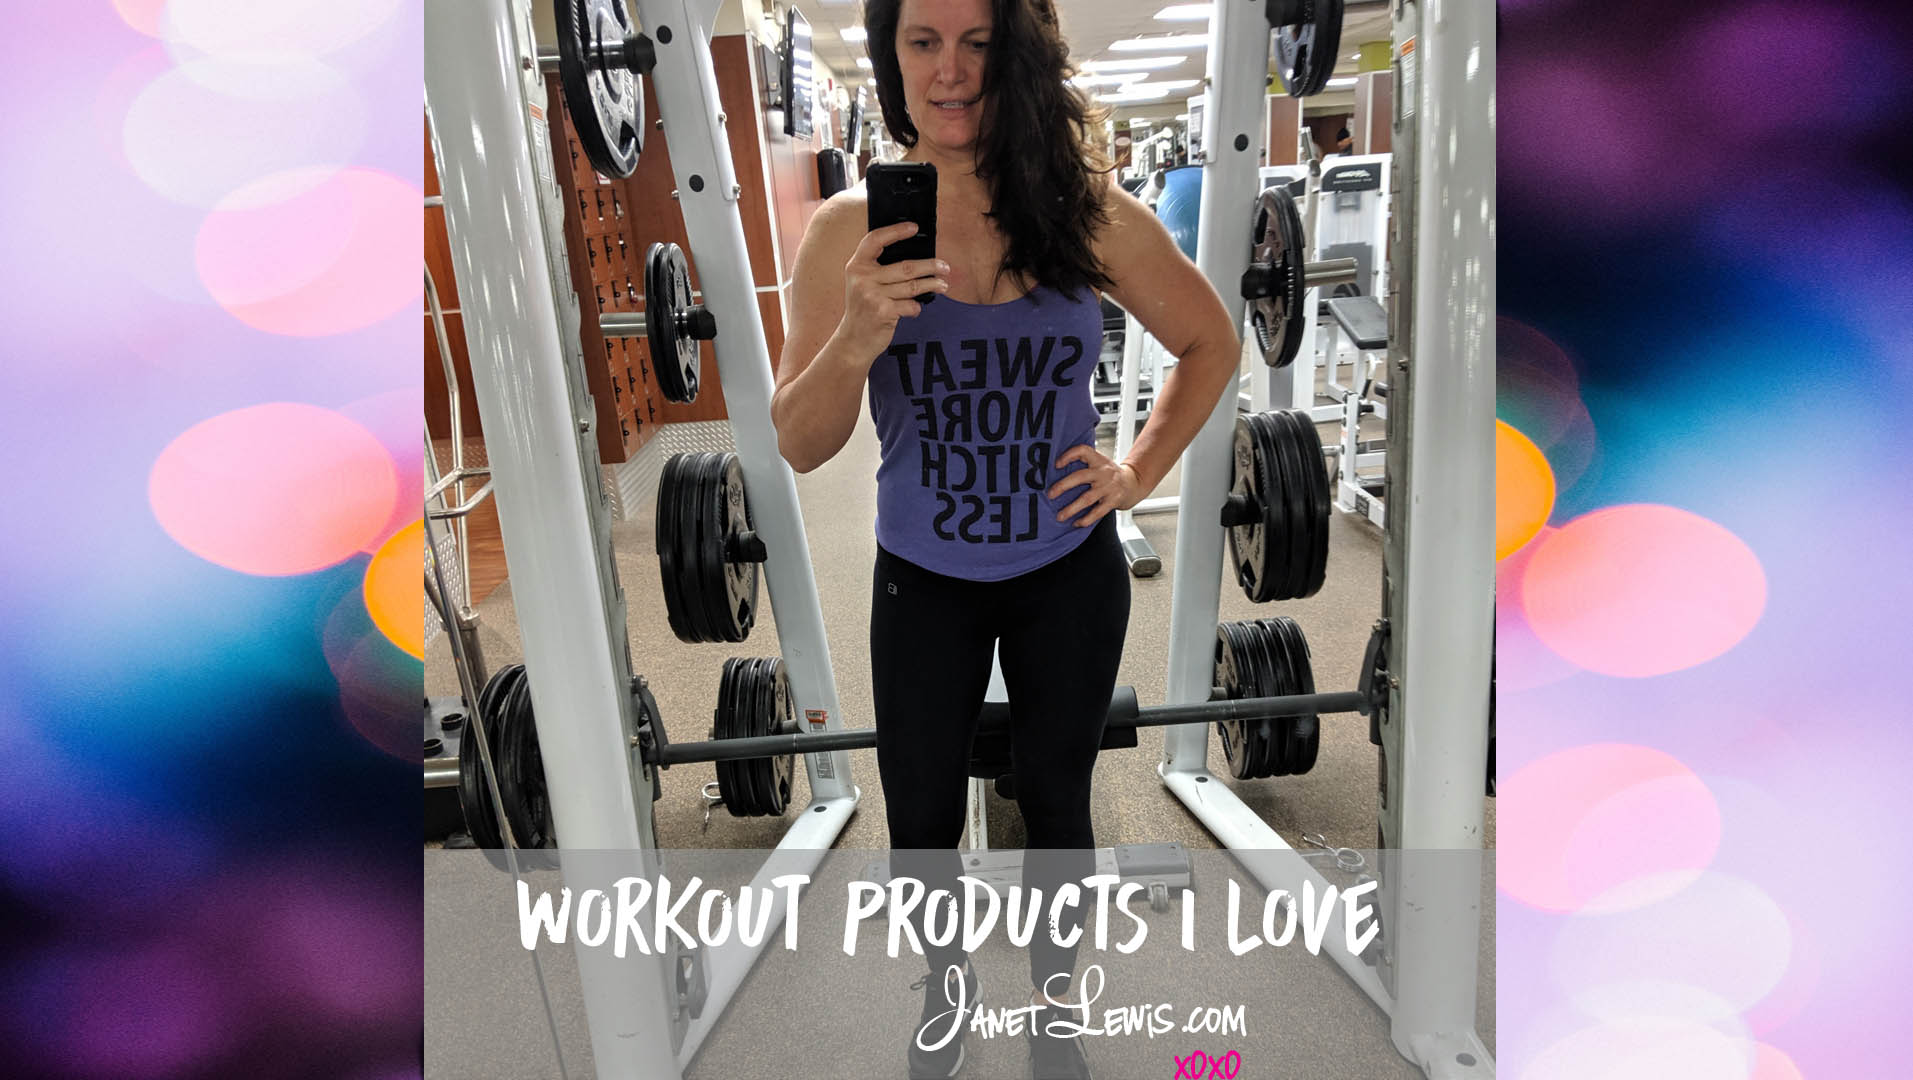 Work Out Products I love - Wide copy